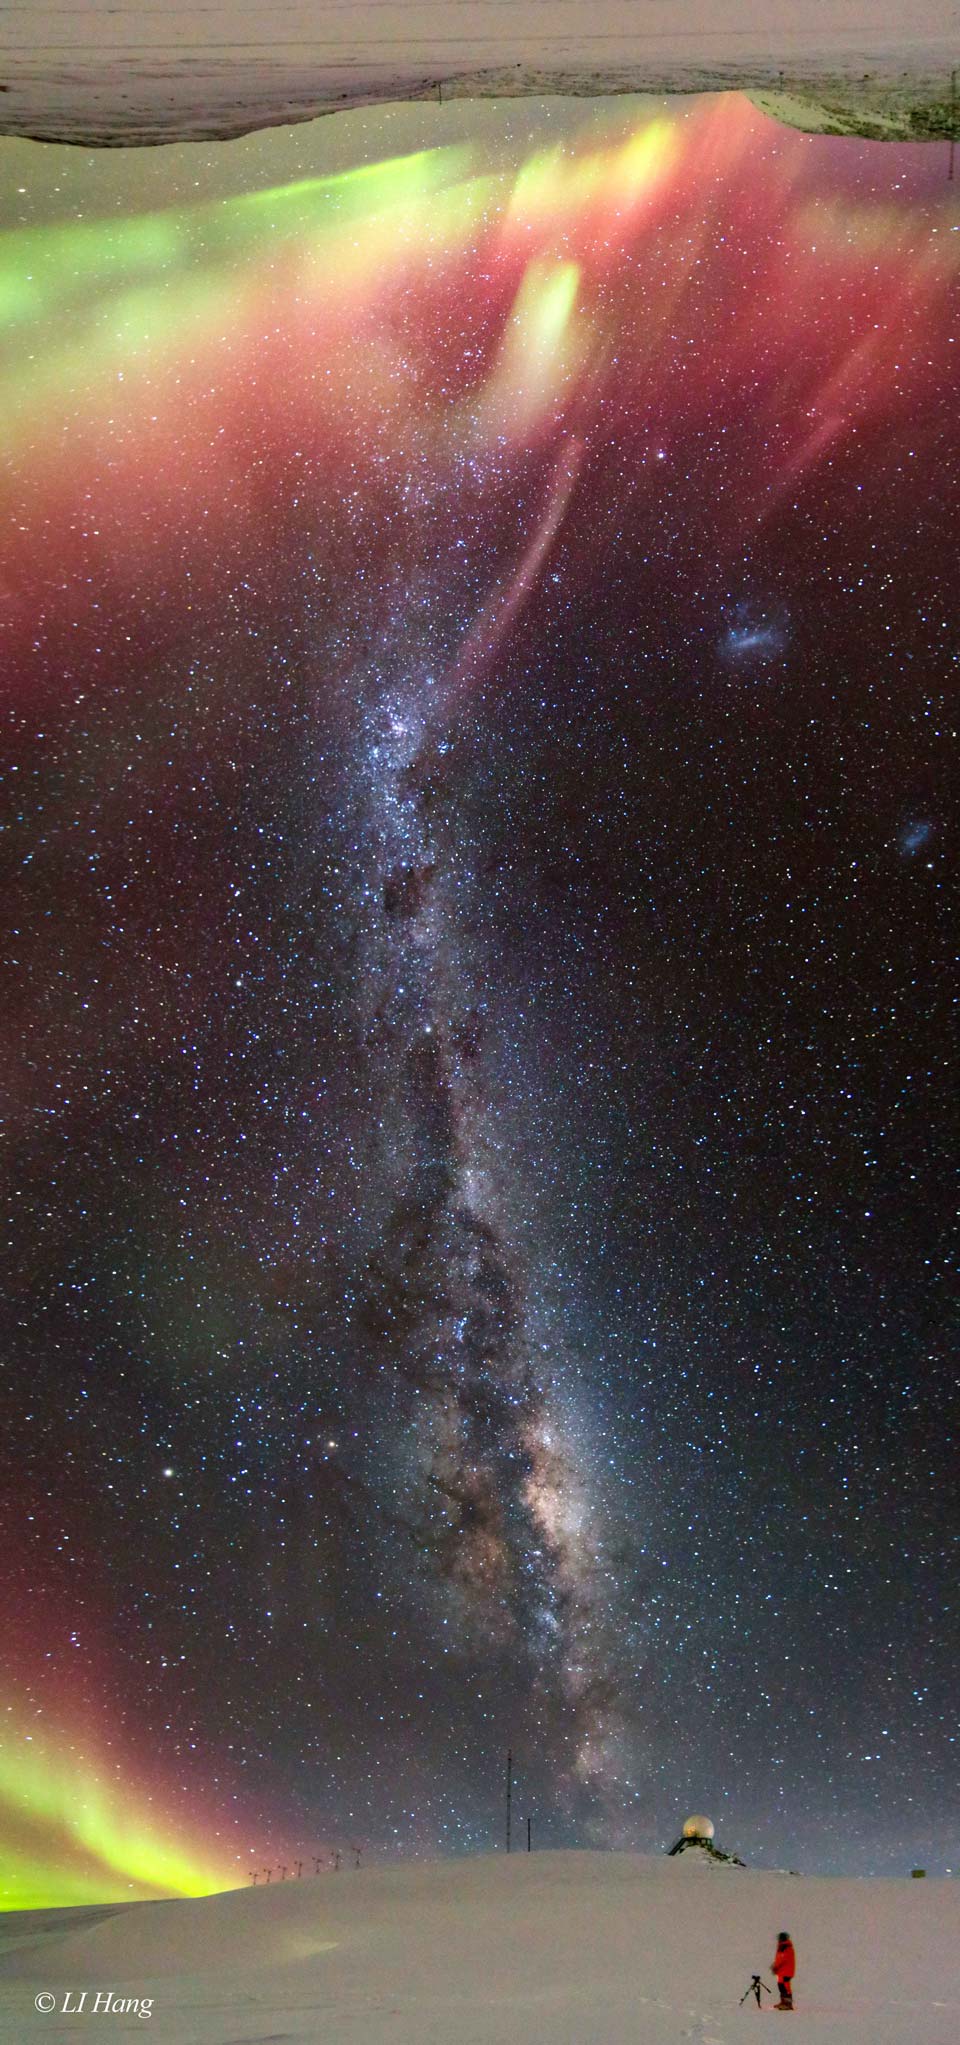 A long vertical image shows a band of the night sky from
horizon at the bottom to the opposite horizon -- at the image top.
A person stands on a snow covered landscape with the central
band of the Milky Way running between horizons. Each horizon
is lit by red, yellow, and green auroras.
Please see the explanation for more detailed information.